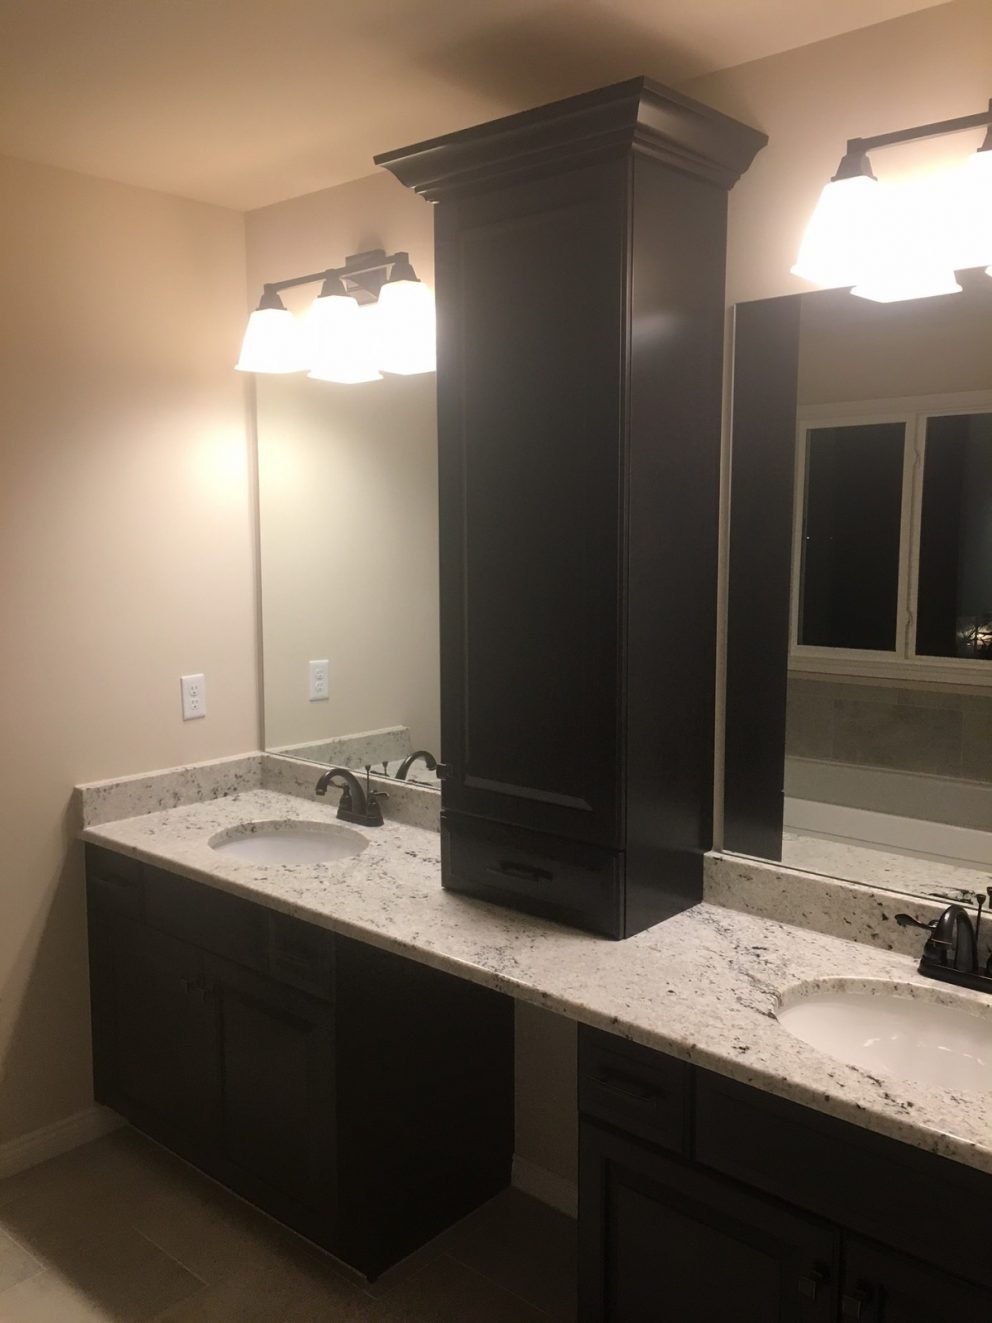 Master bath with his and her sinks and tower cabinet